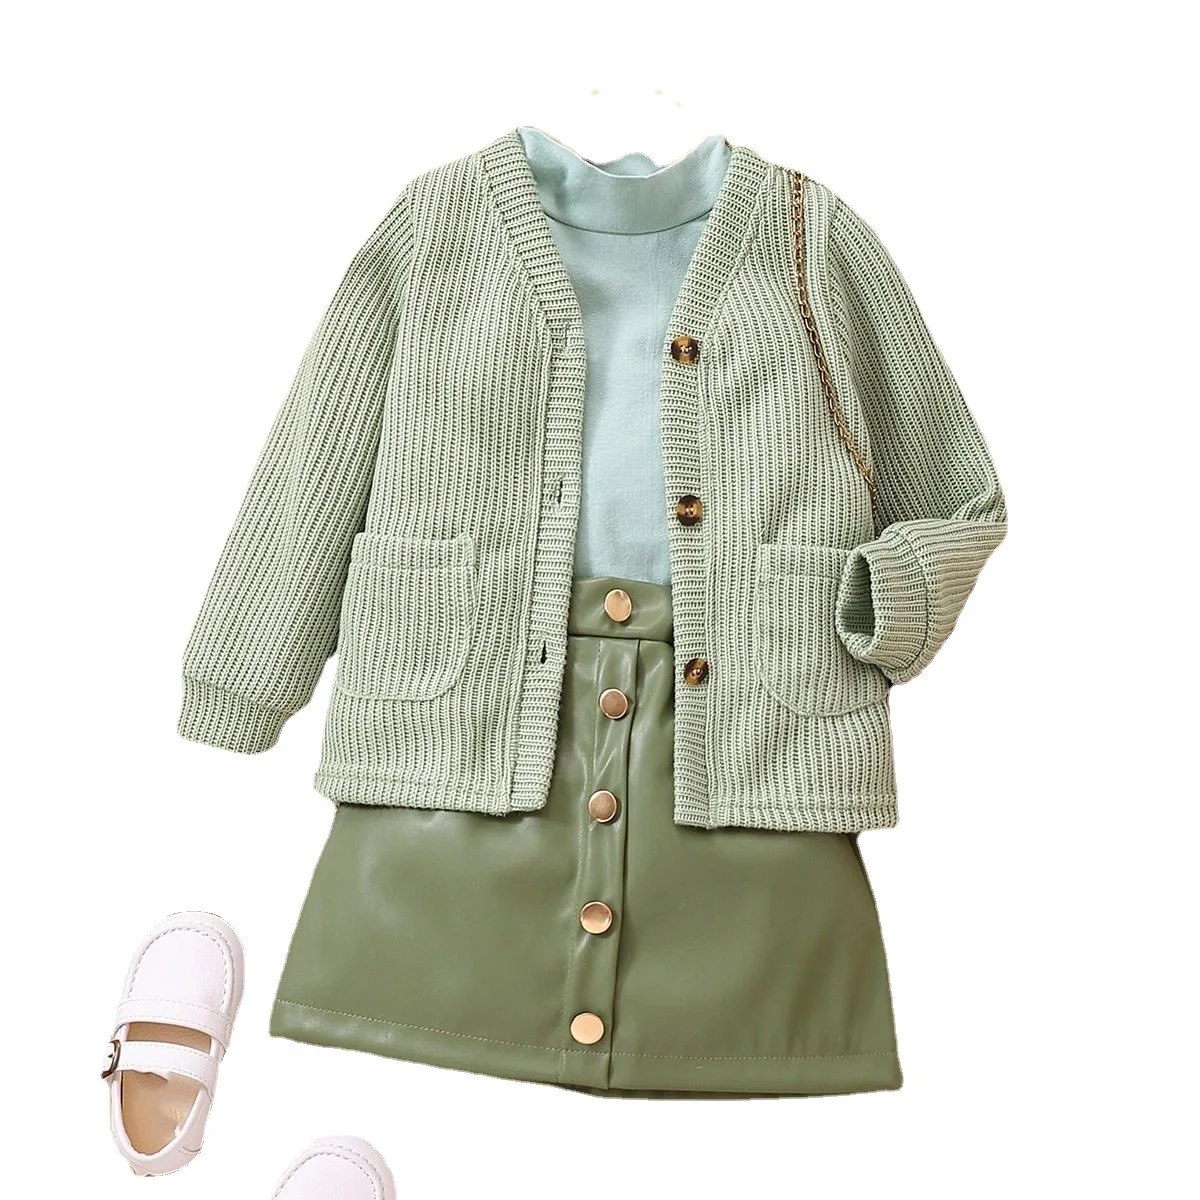 New arrival toddler girls clothes fashion outfits leather skirt+shirts+cardigan sweater 3pcs boutique kids clothing suits